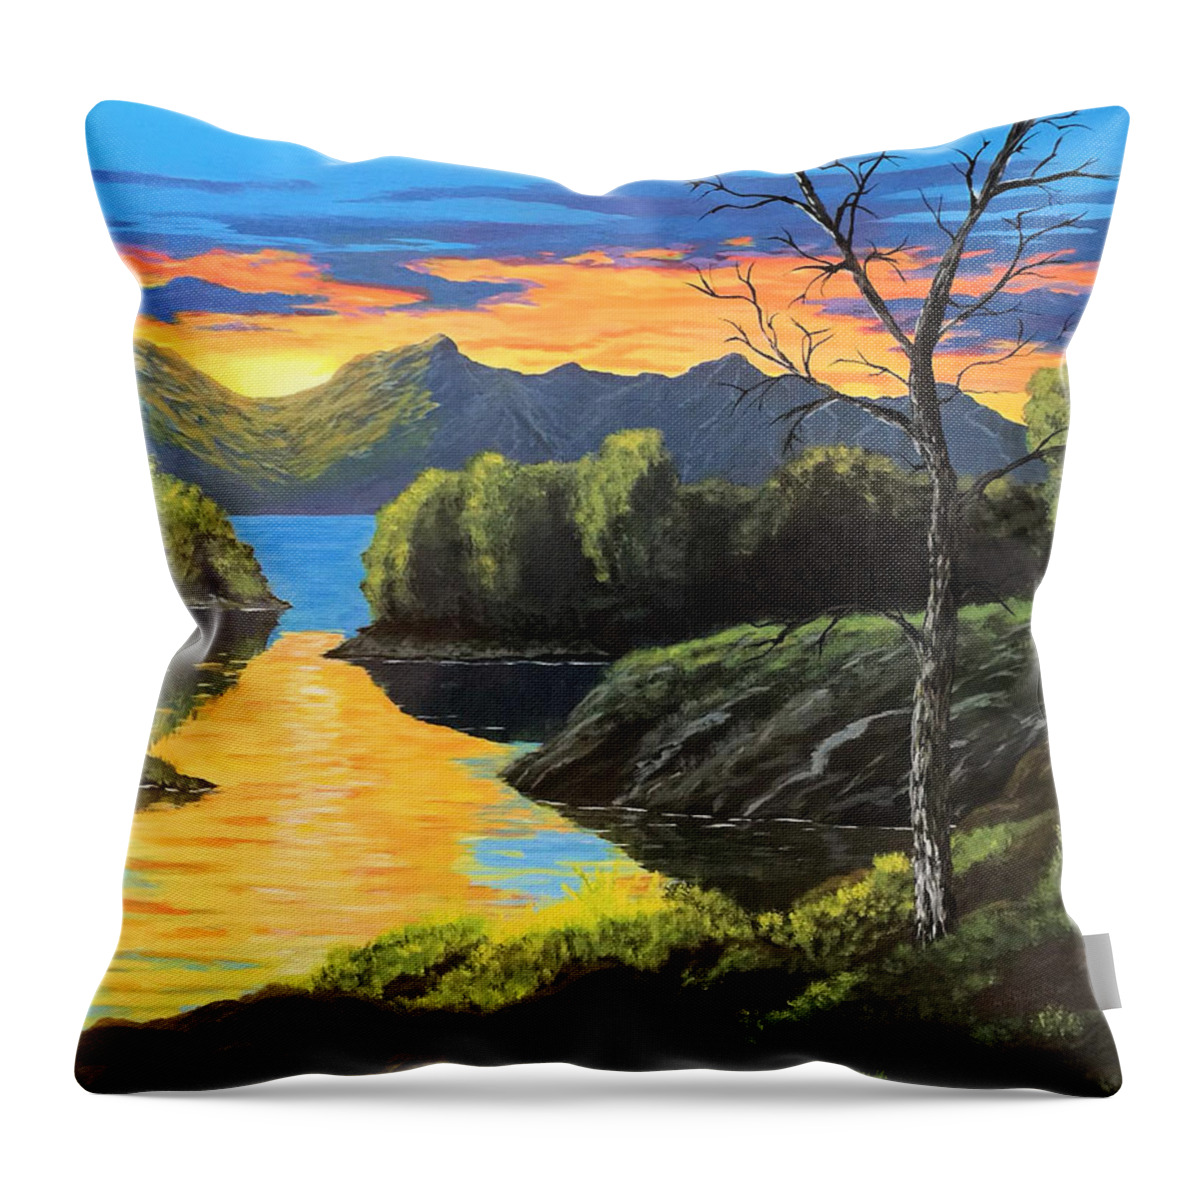 Landacape Throw Pillow featuring the painting A-814 by Art by Gabriele